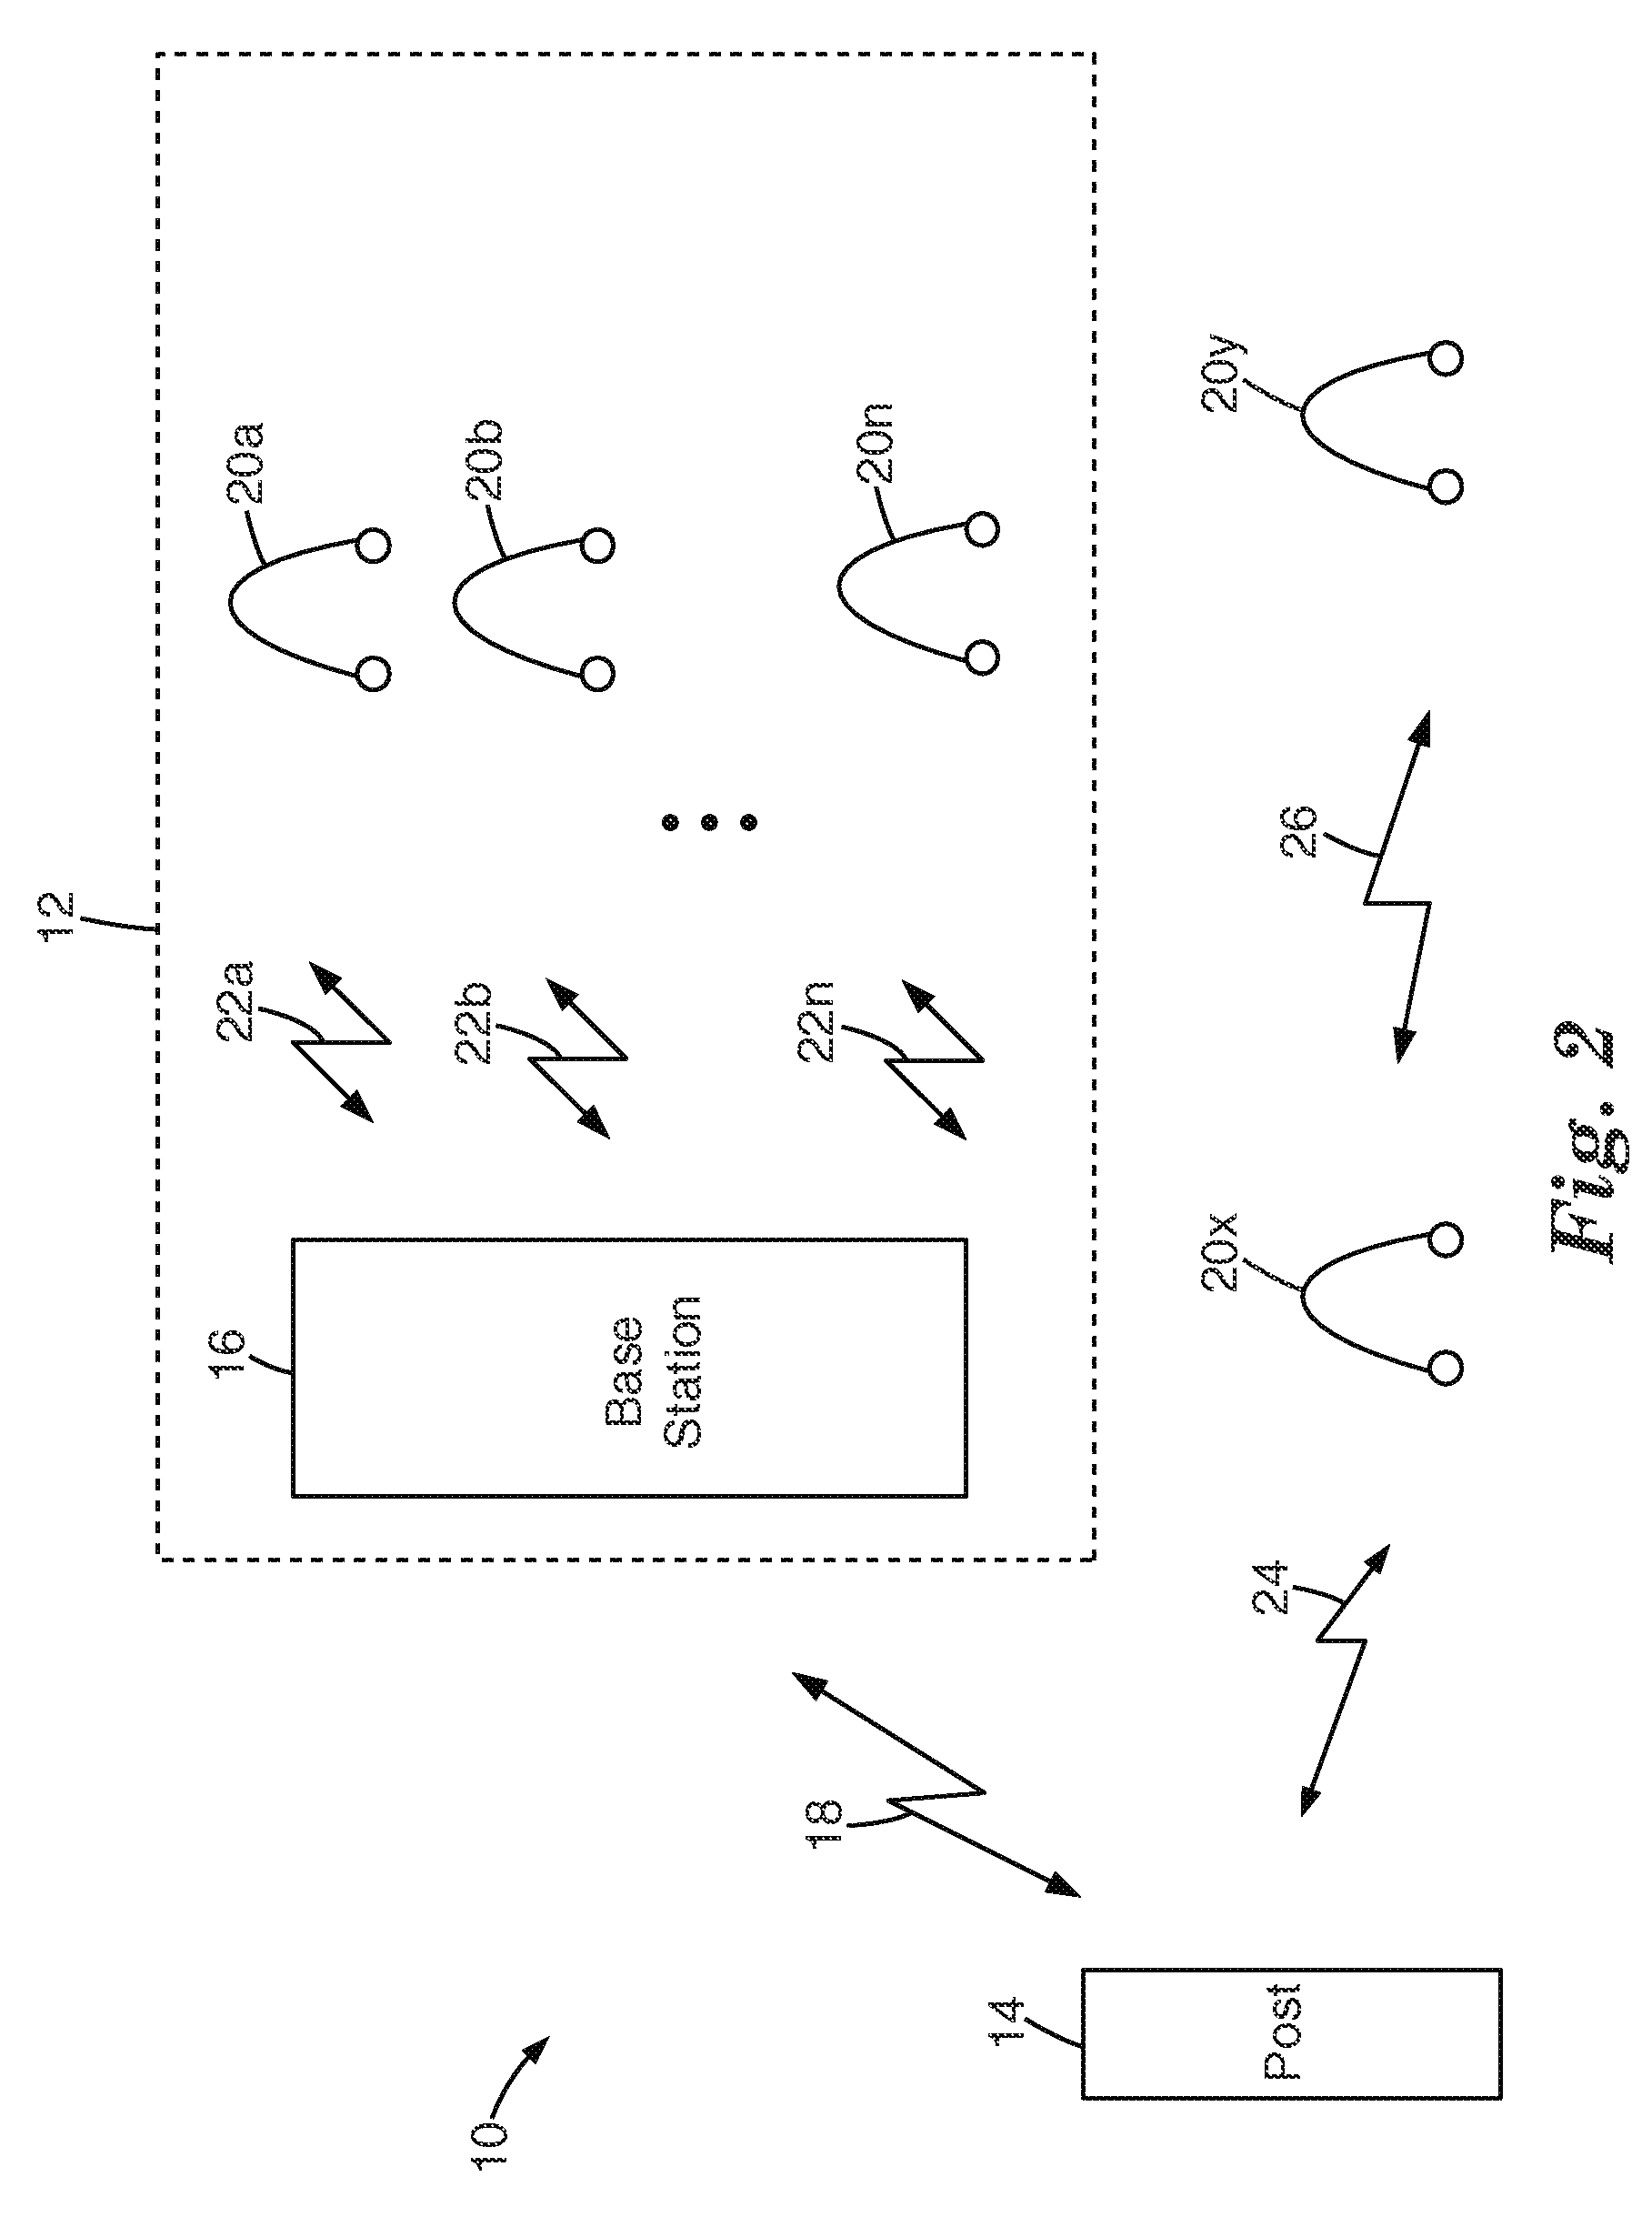 Order taking system for a quick service restaurant using multiple wireless communication channels